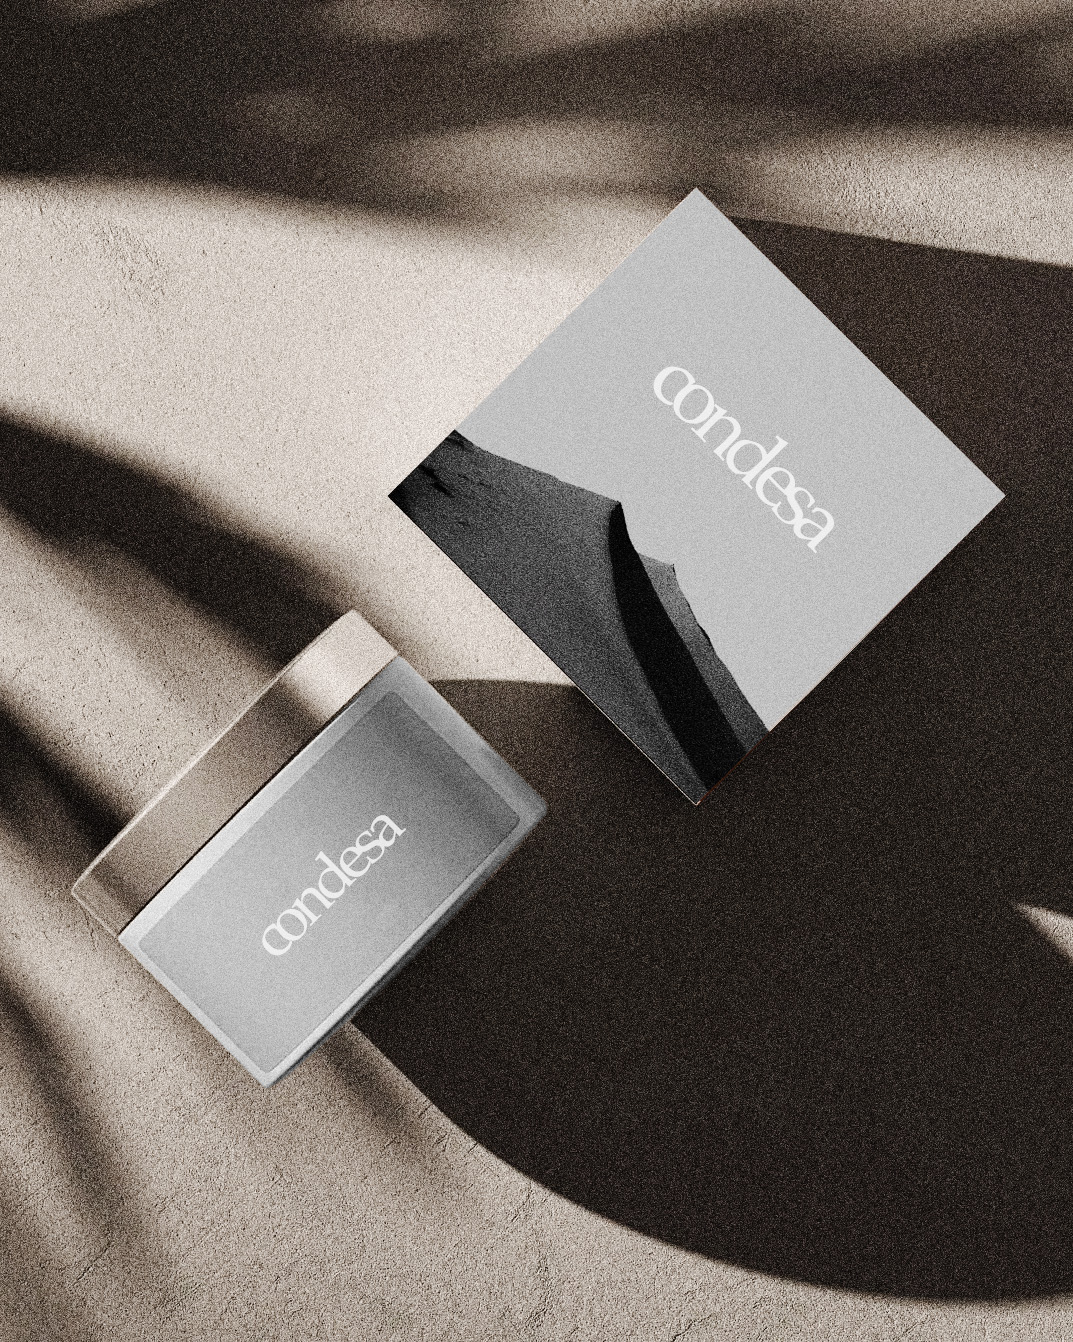 Condesa Cosmetic Brand Design by Fer Flores